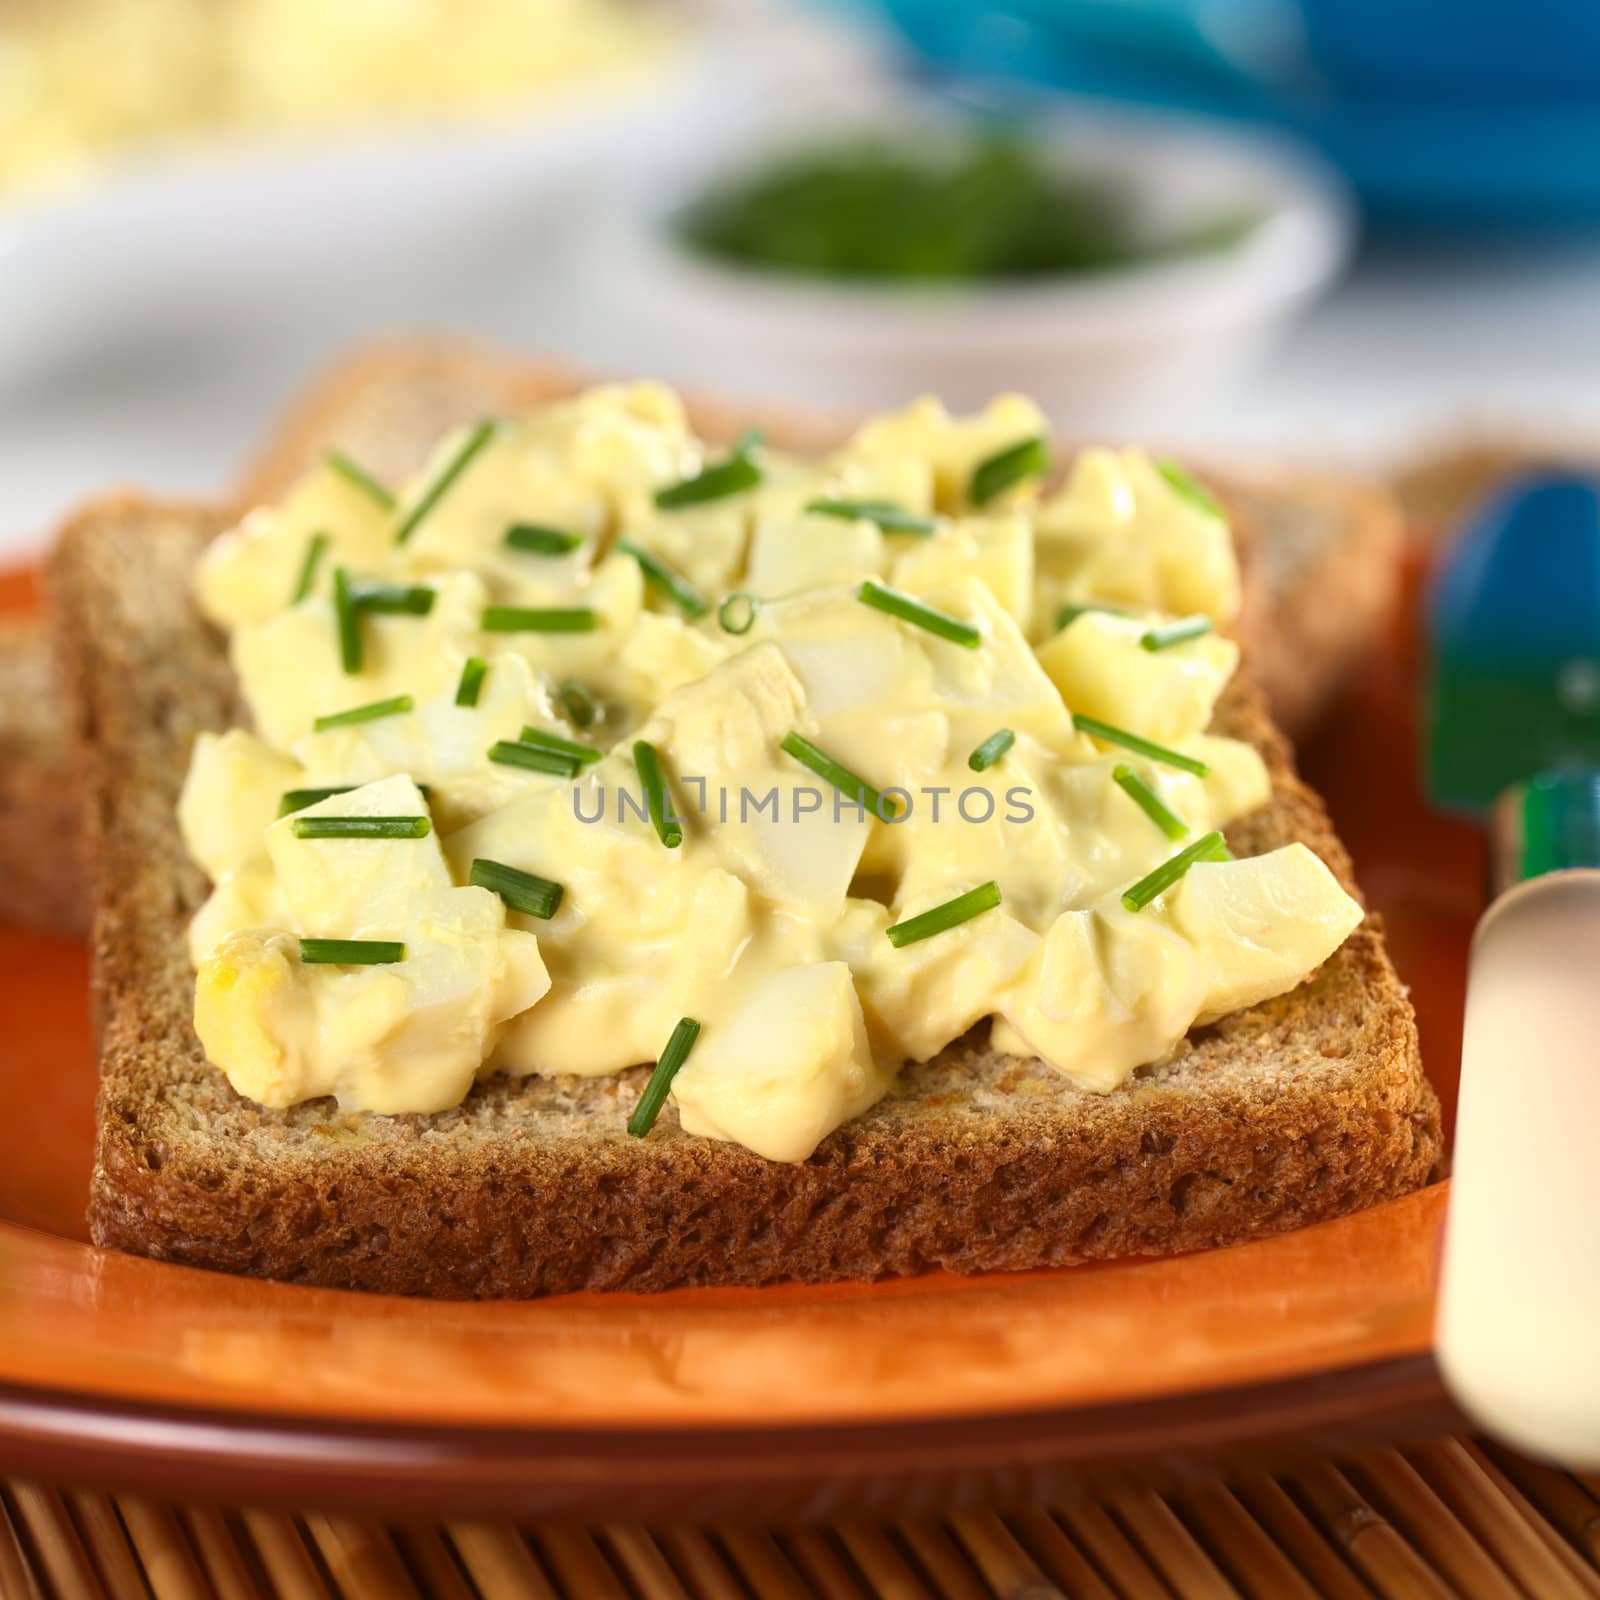 Egg salad with chives on wholewheat toast bread (Selective Focus, Focus on the front of the salad)